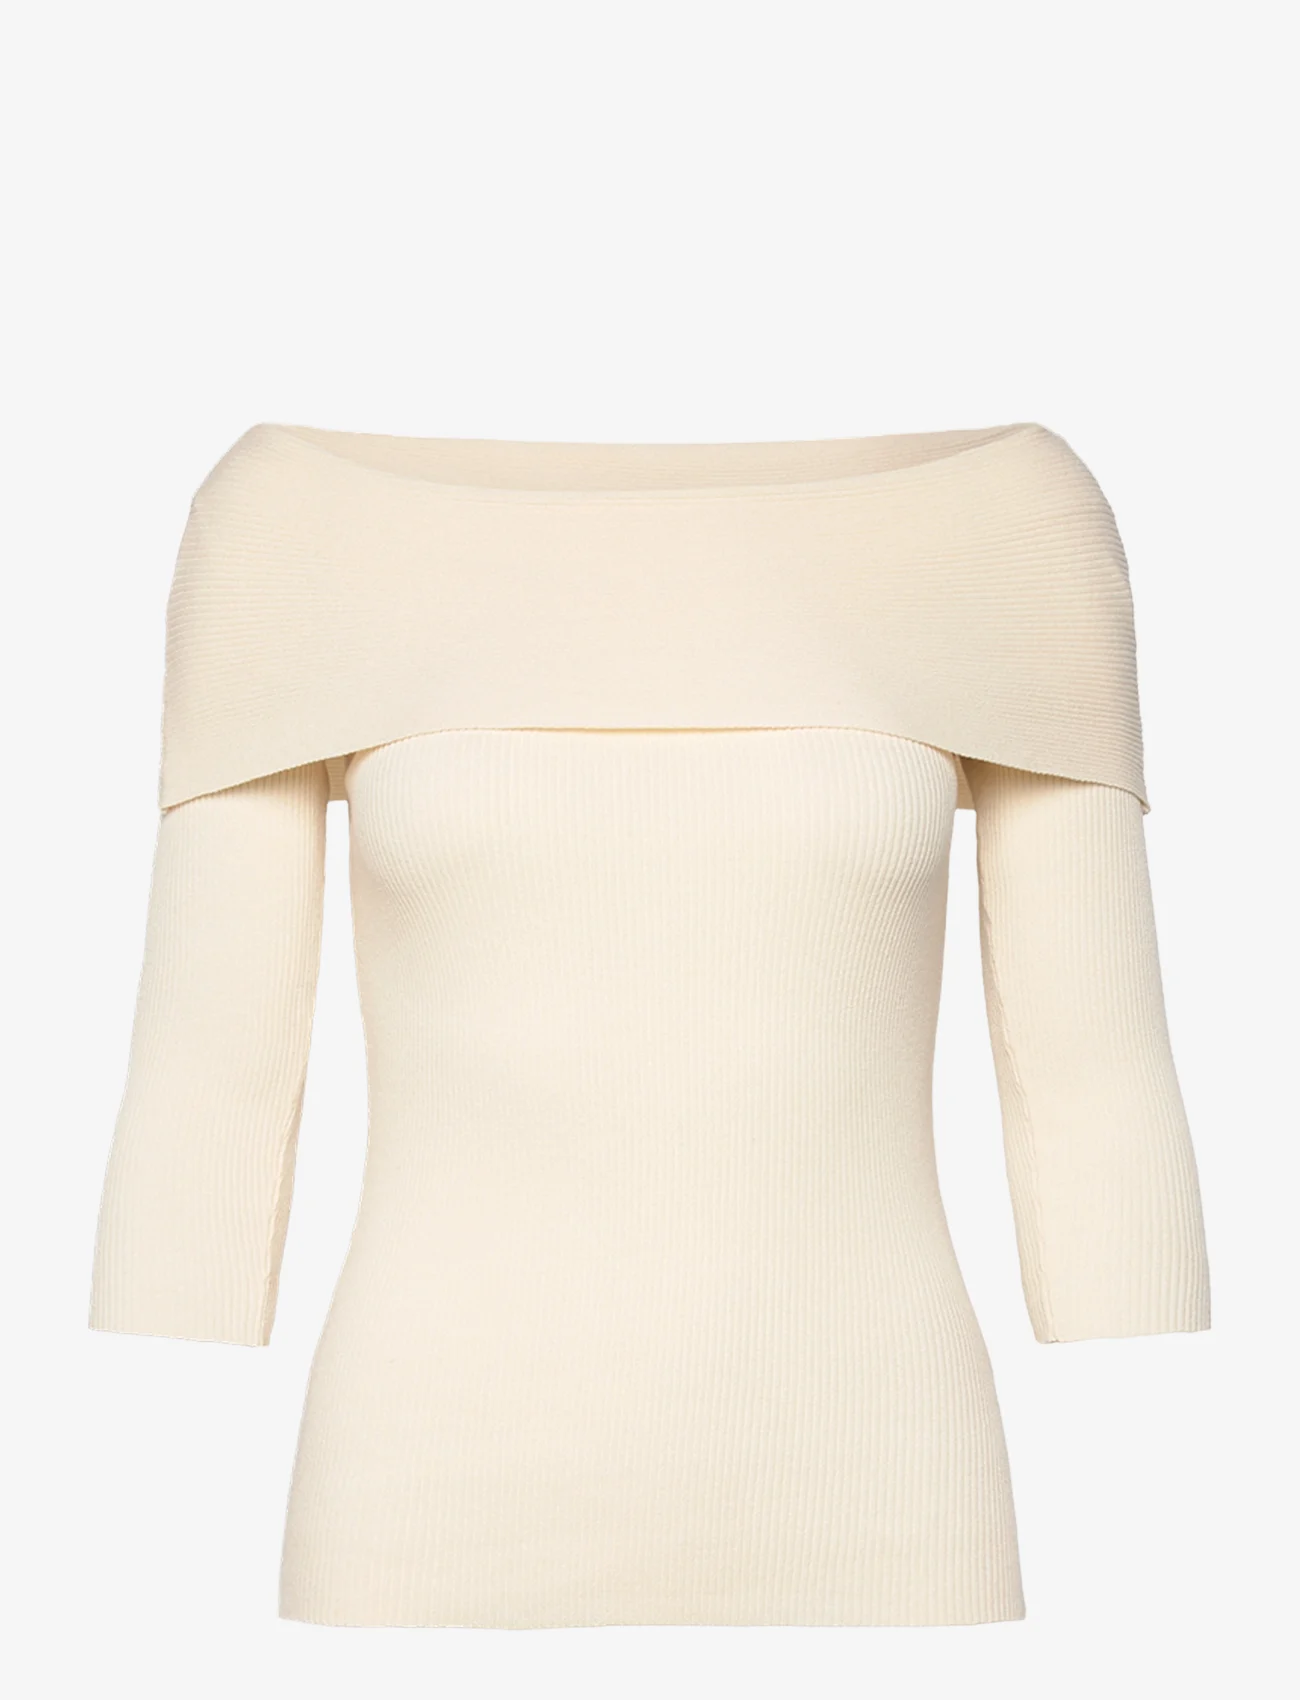 Soaked in Luxury - SLIndianna Offshoulder Pullover - long-sleeved tops - pearled ivory - 0